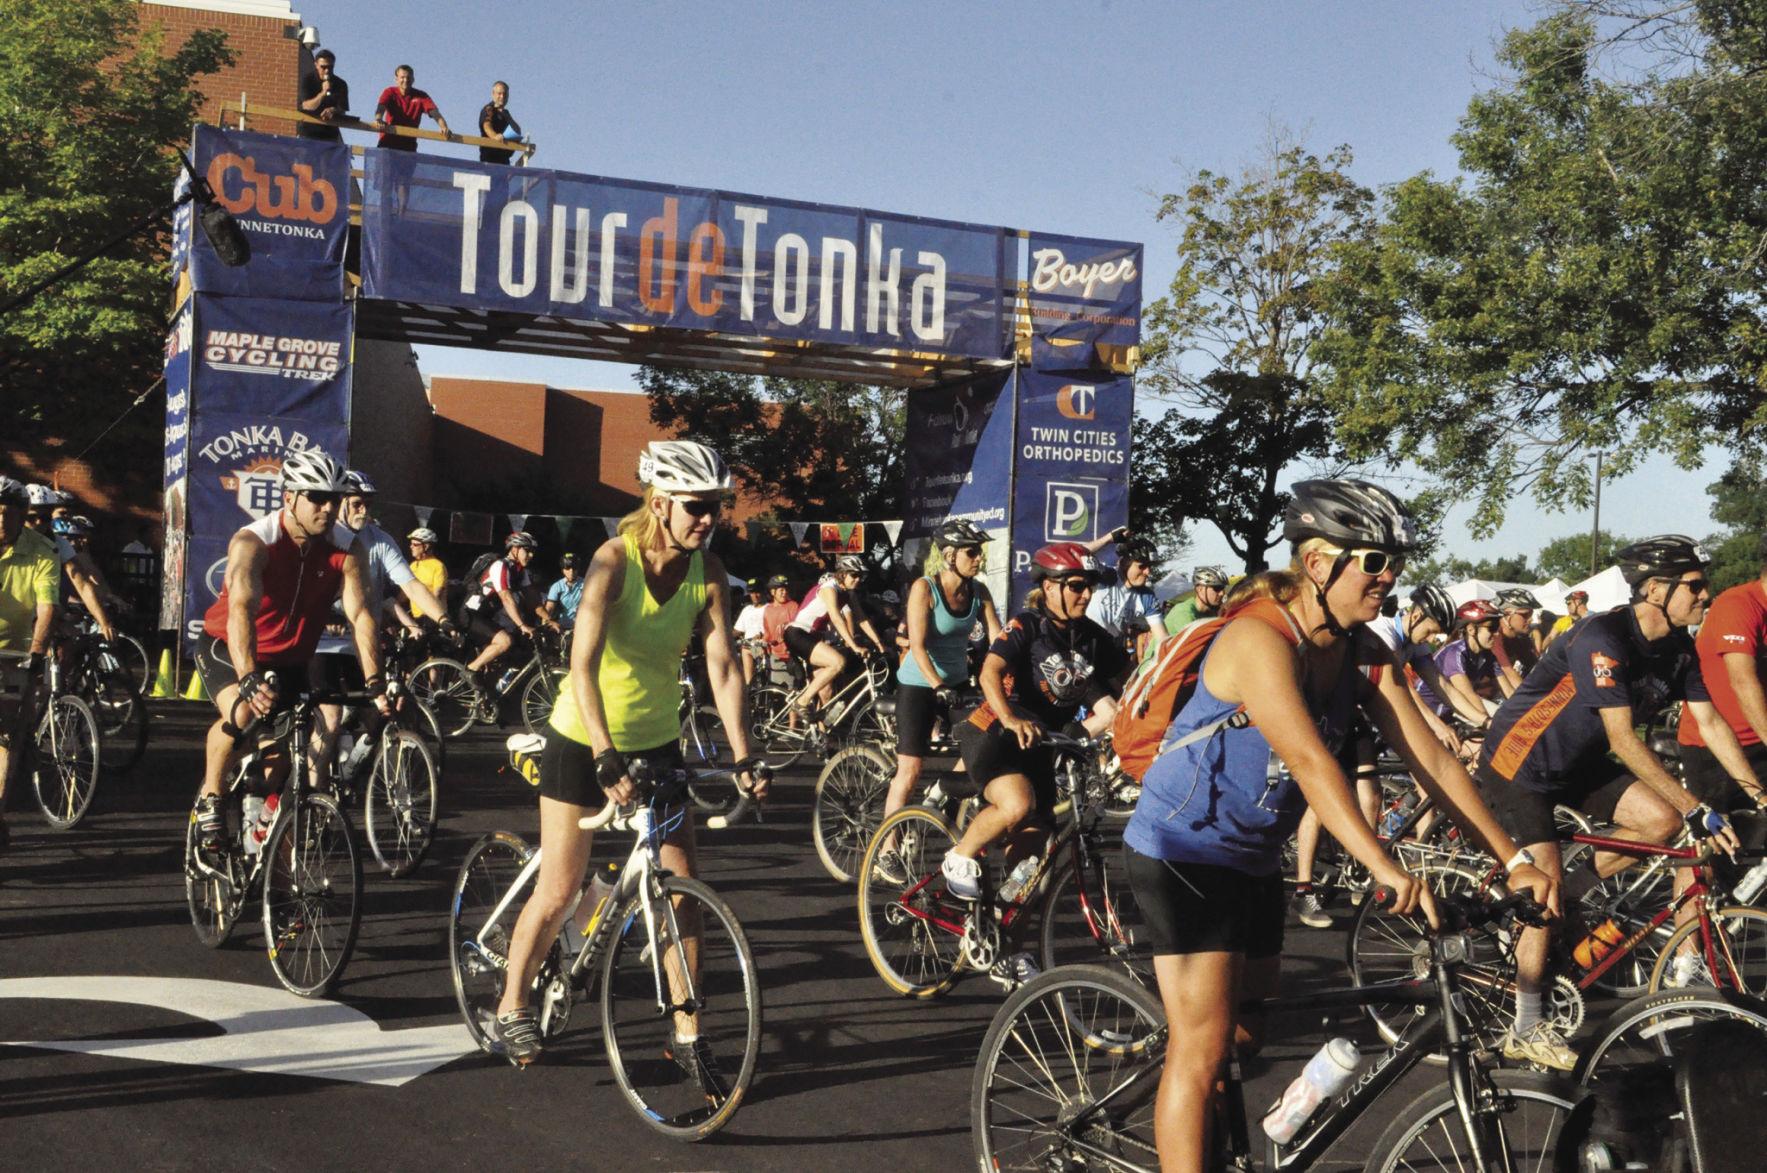 Tour de Tonka expecting 3,500 riders in 11th year Local News